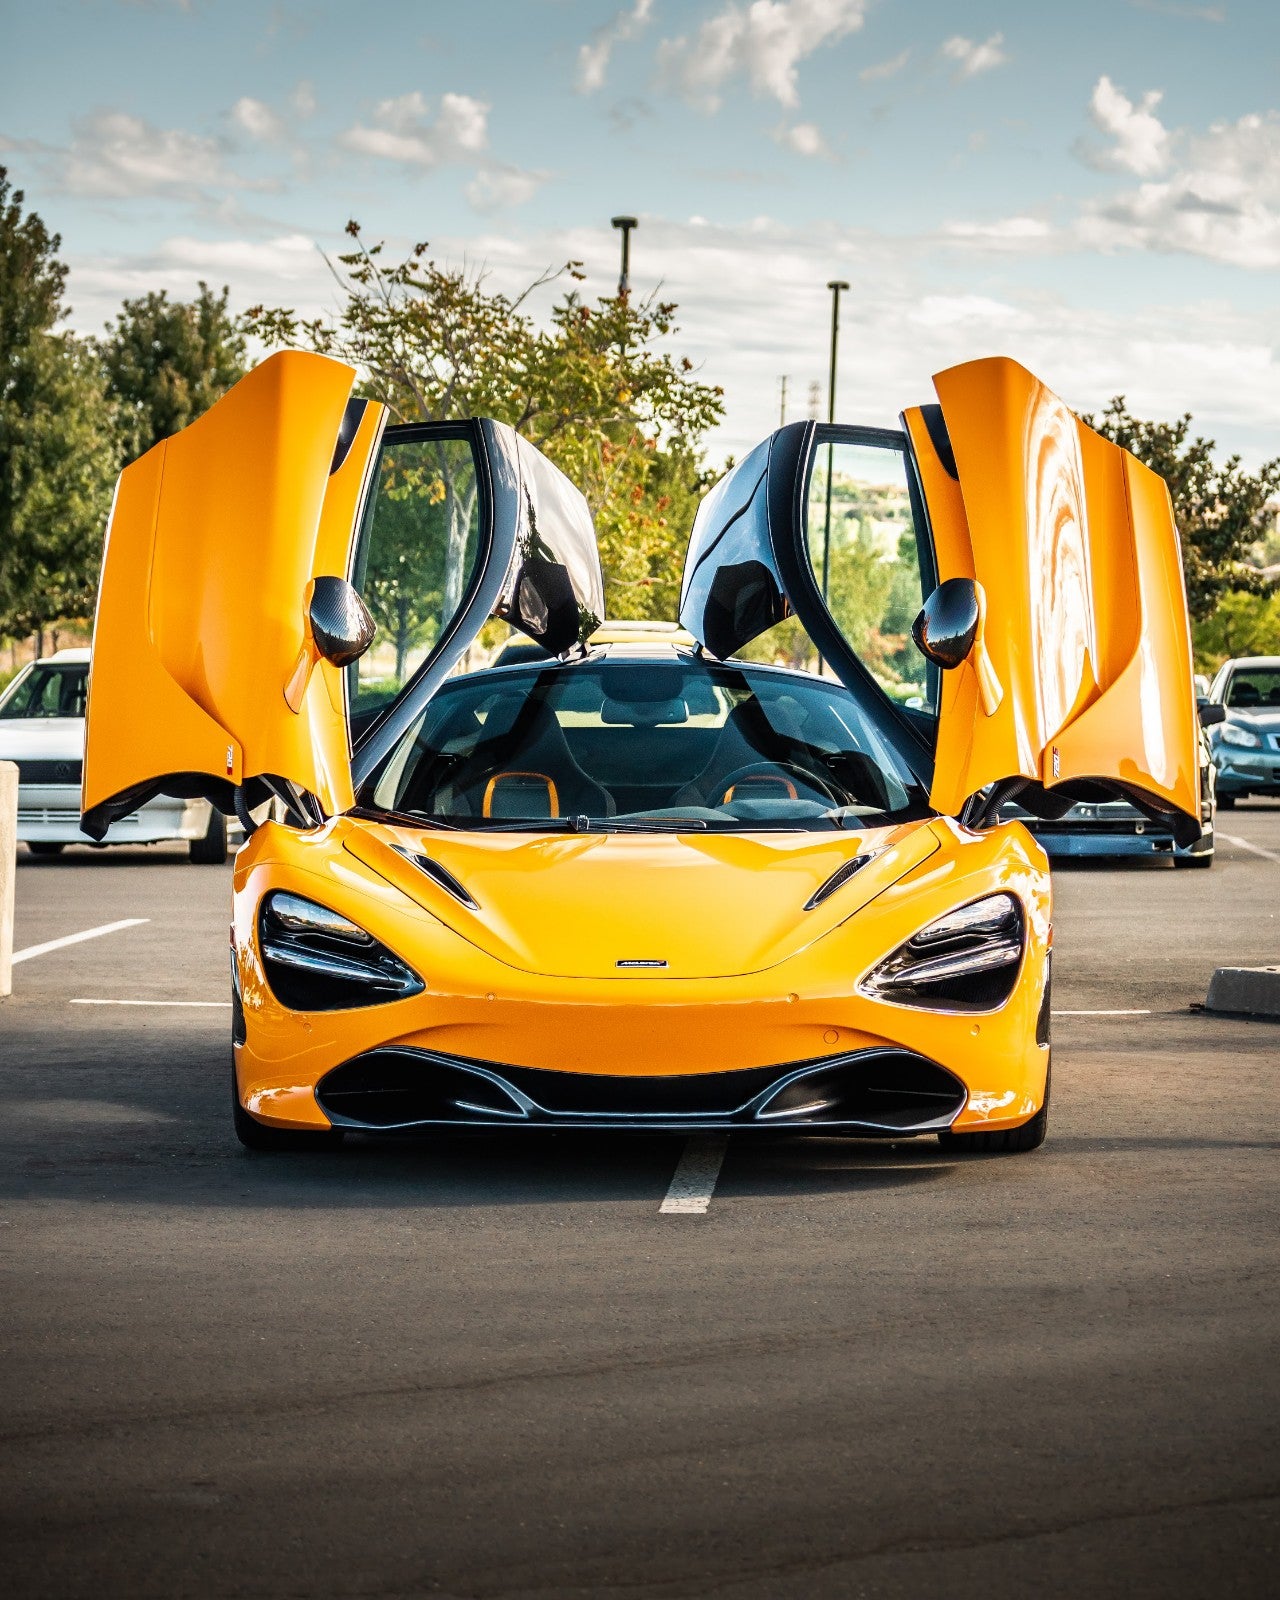 I think the McLaren 720S came ready for its close up at Cars and Coffee. [OC]